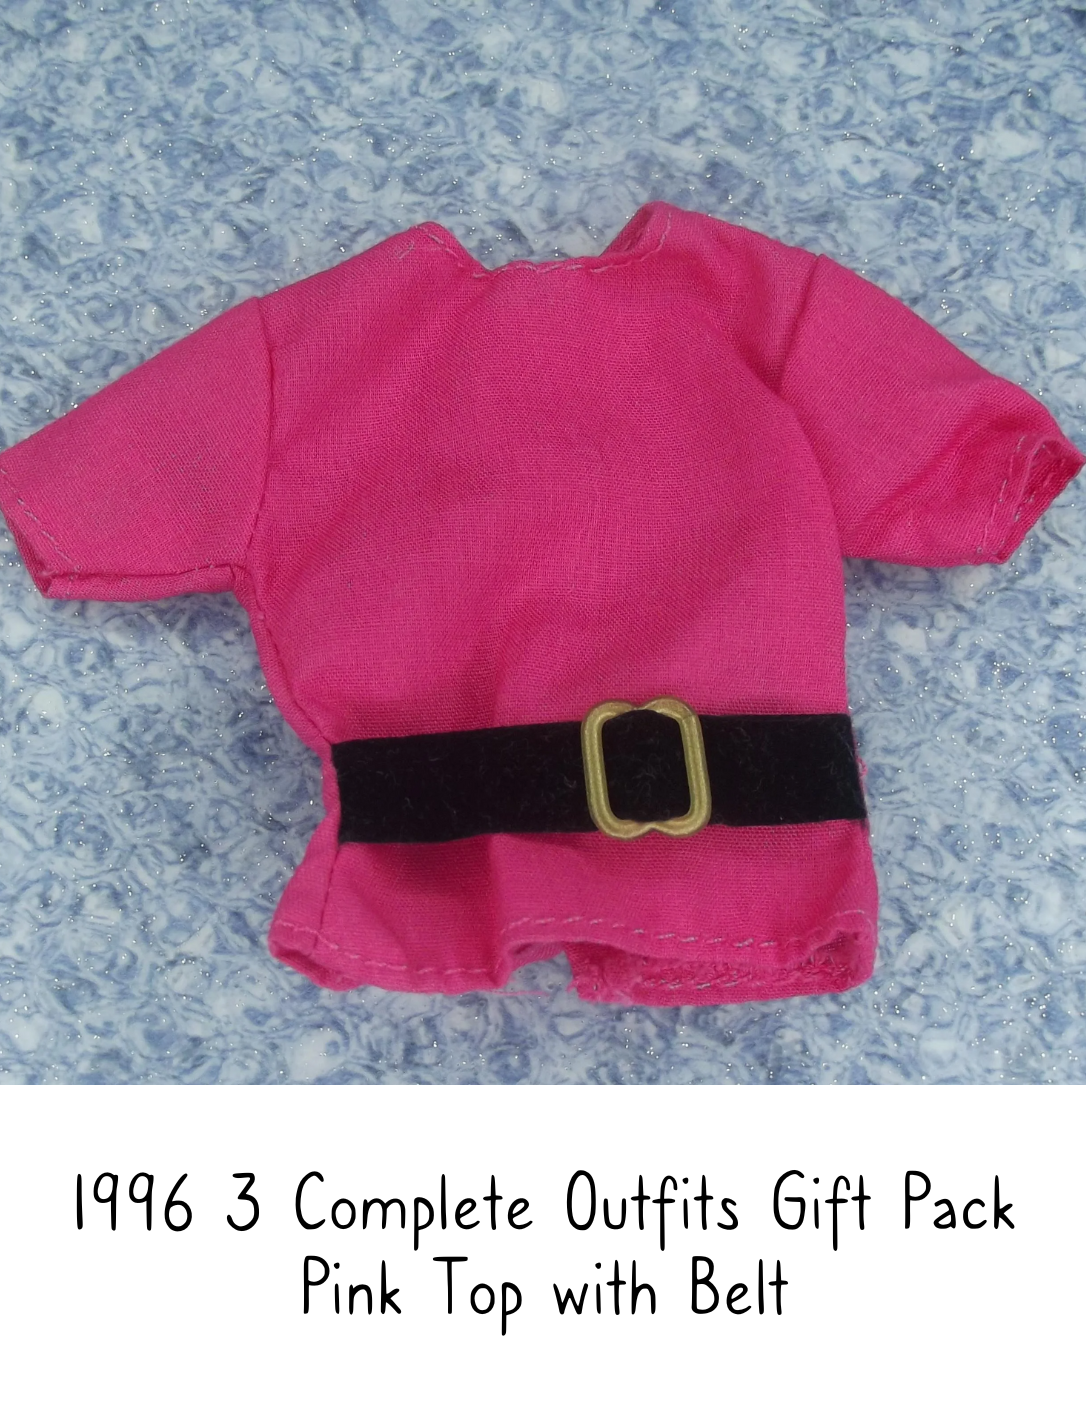 1996 3 Complete Outfits Barbie Fashion Pack Pink Top with Black Belt